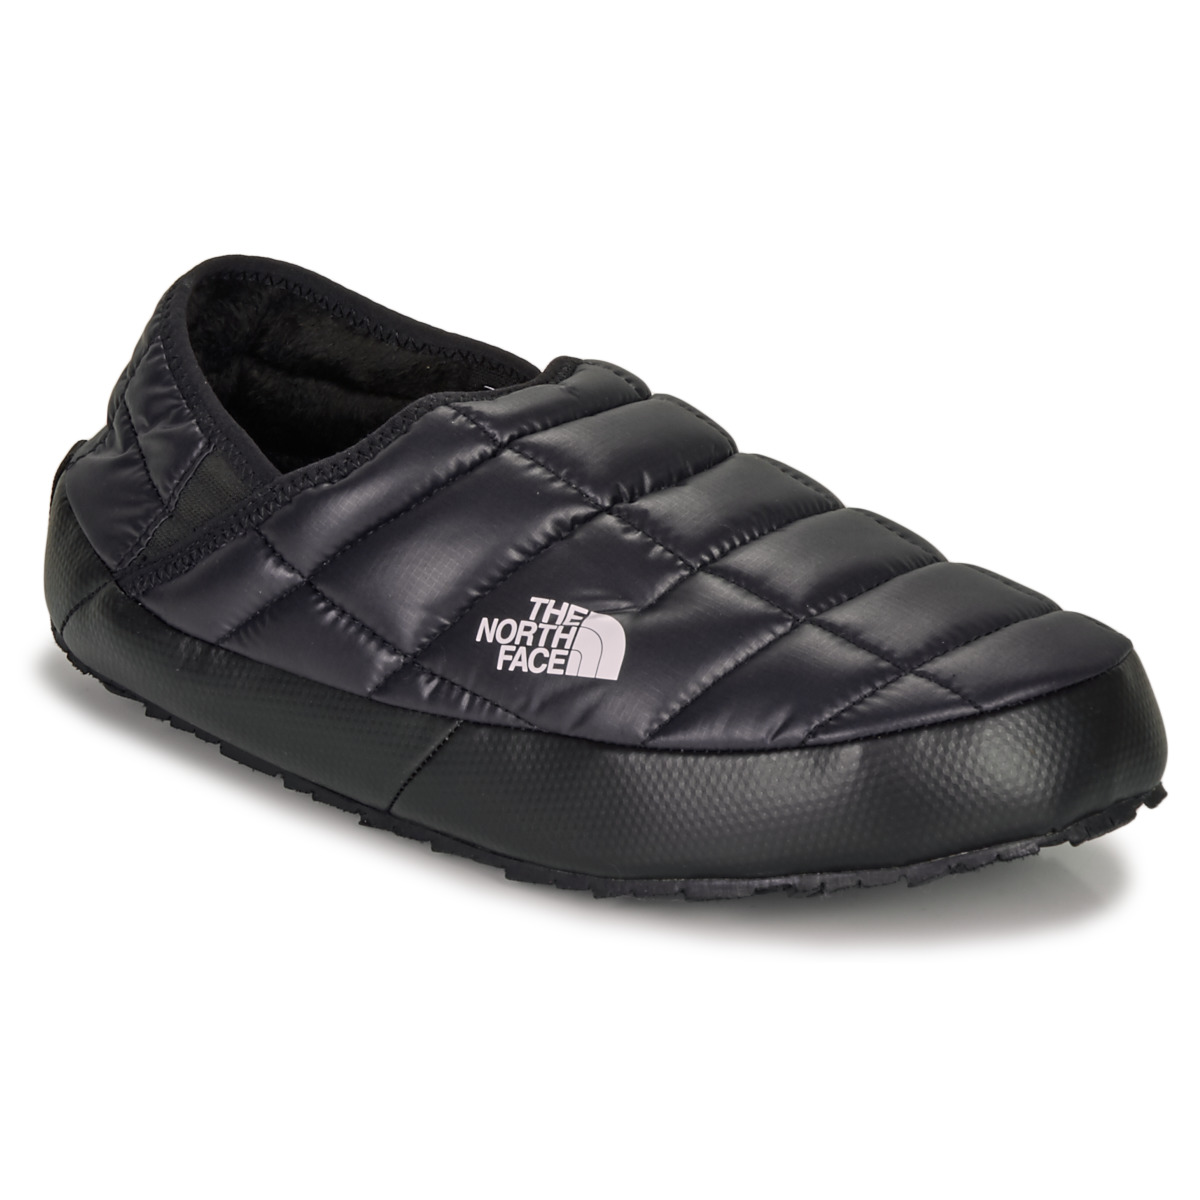 Buty Męskie Obuwie domowe The North Face THERMOBALL TRACTION MULE V Czarny / Biały